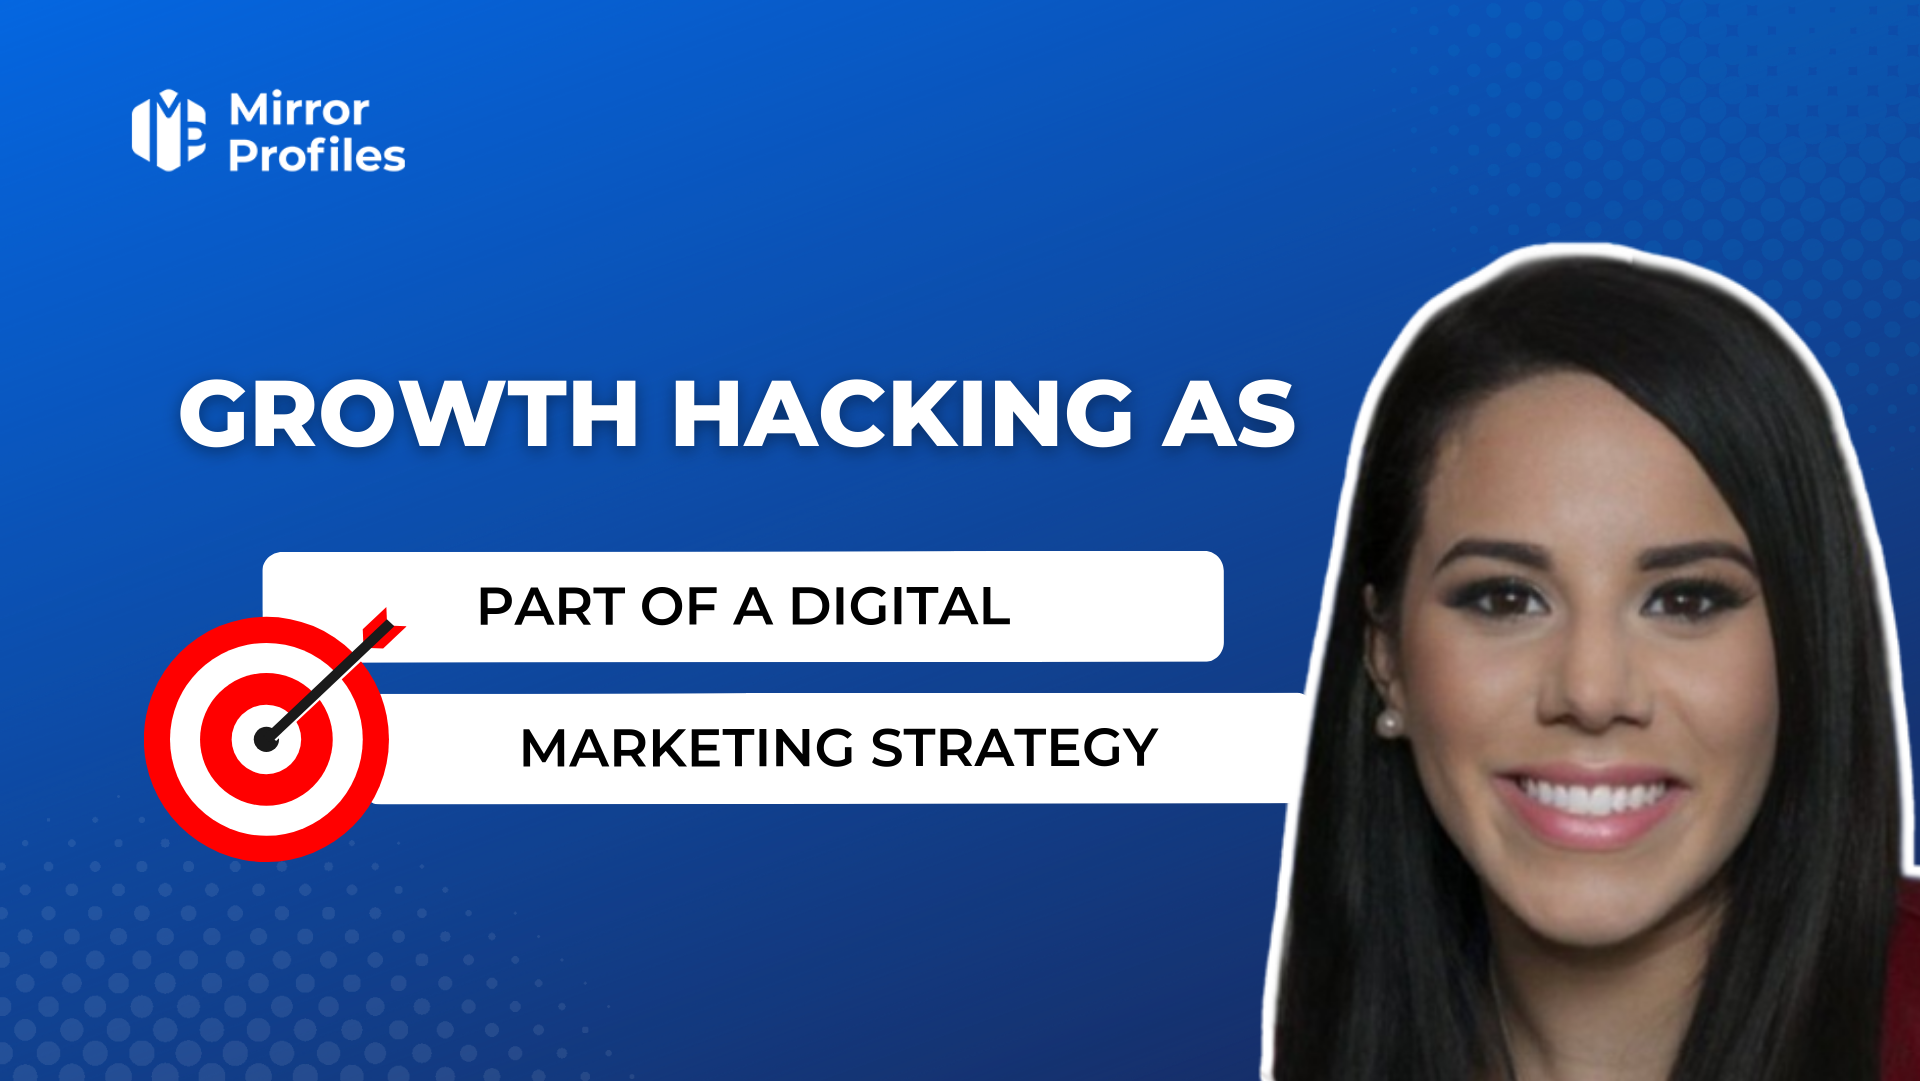 Growth Hacking as part of a digital marketing strategy